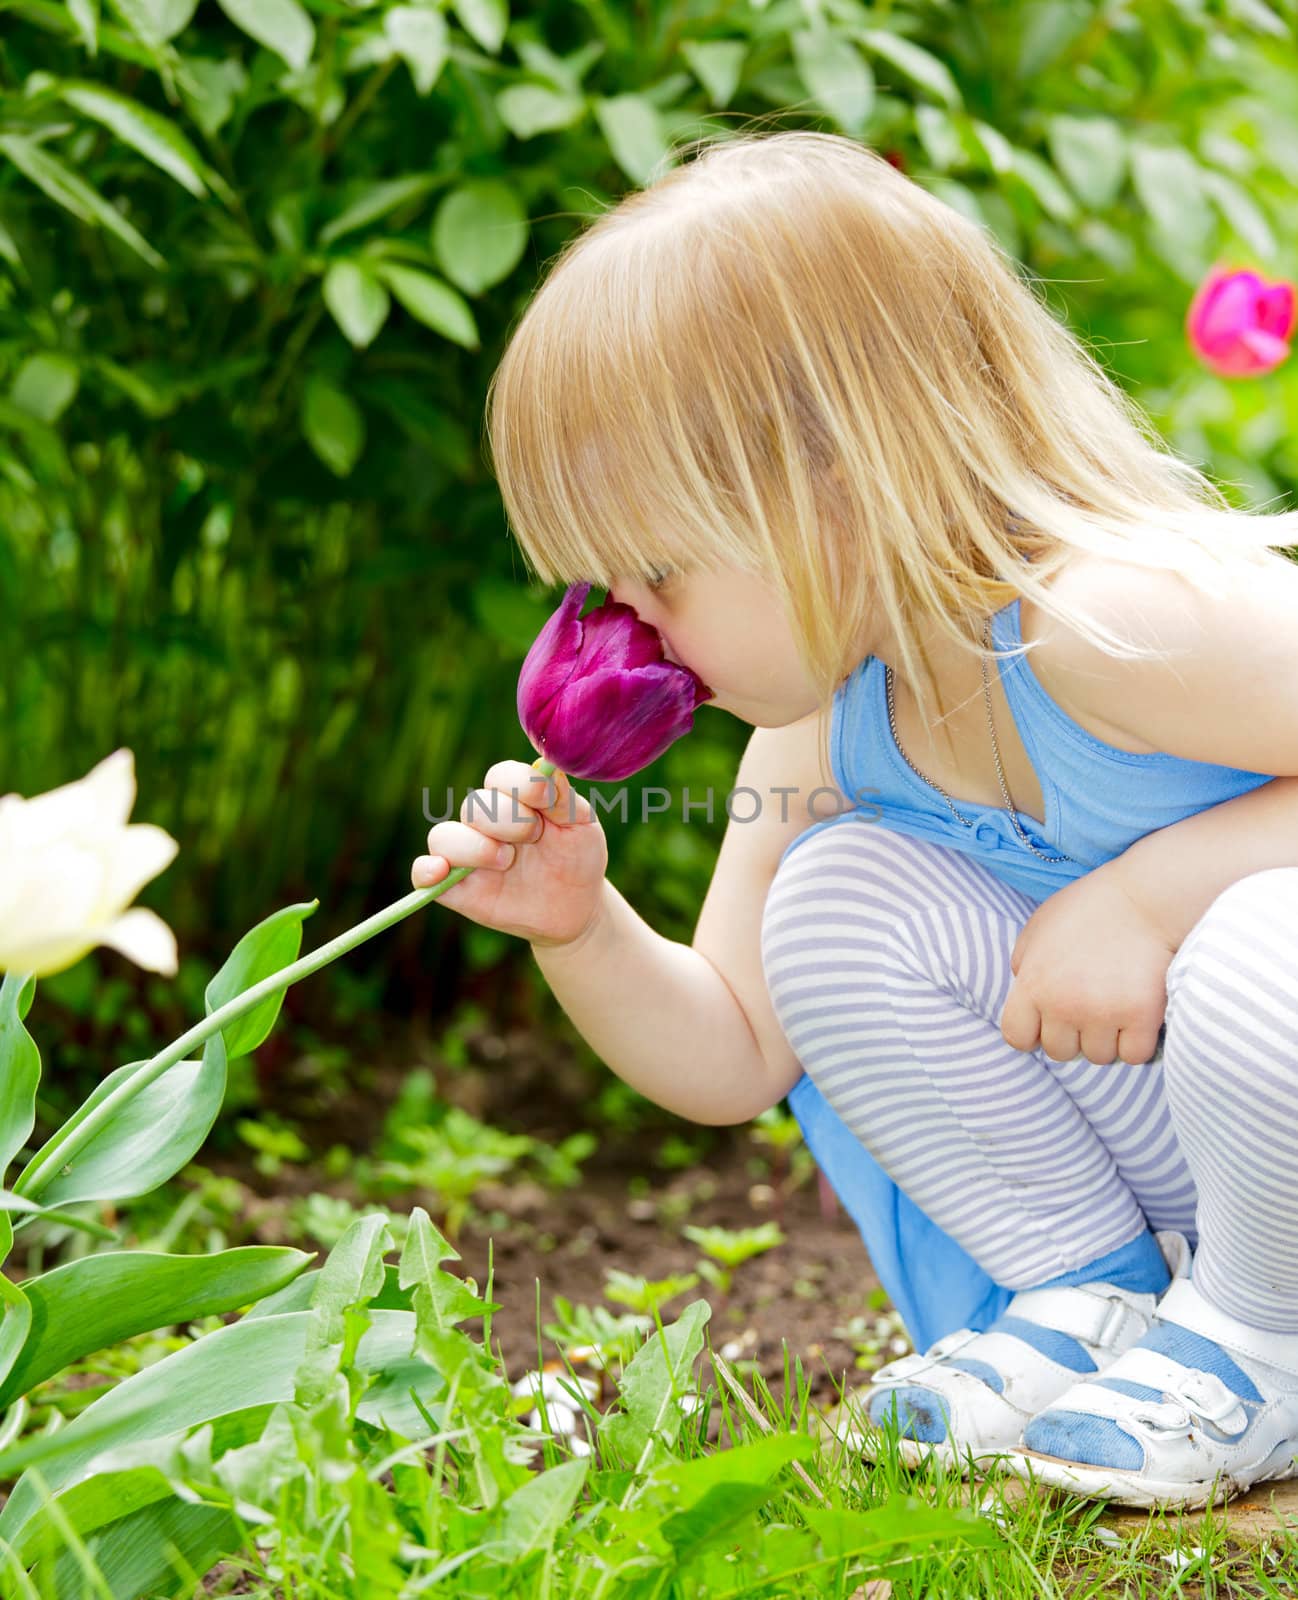 Child smelling flower by naumoid